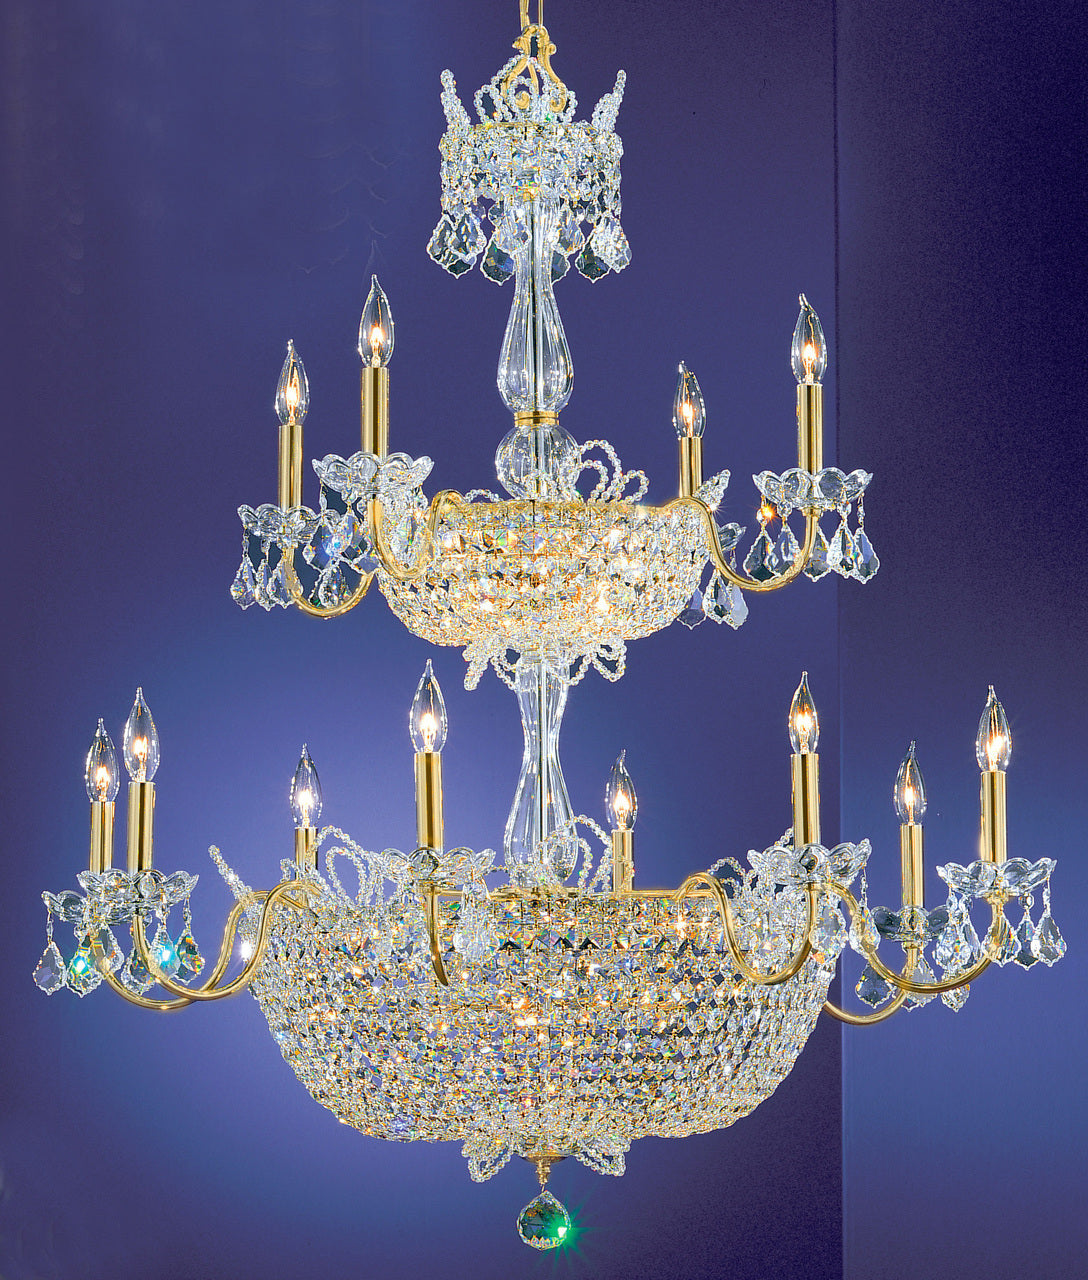 Classic Lighting 69789 GP SC Crown Jewels Crystal Chandelier in Gold